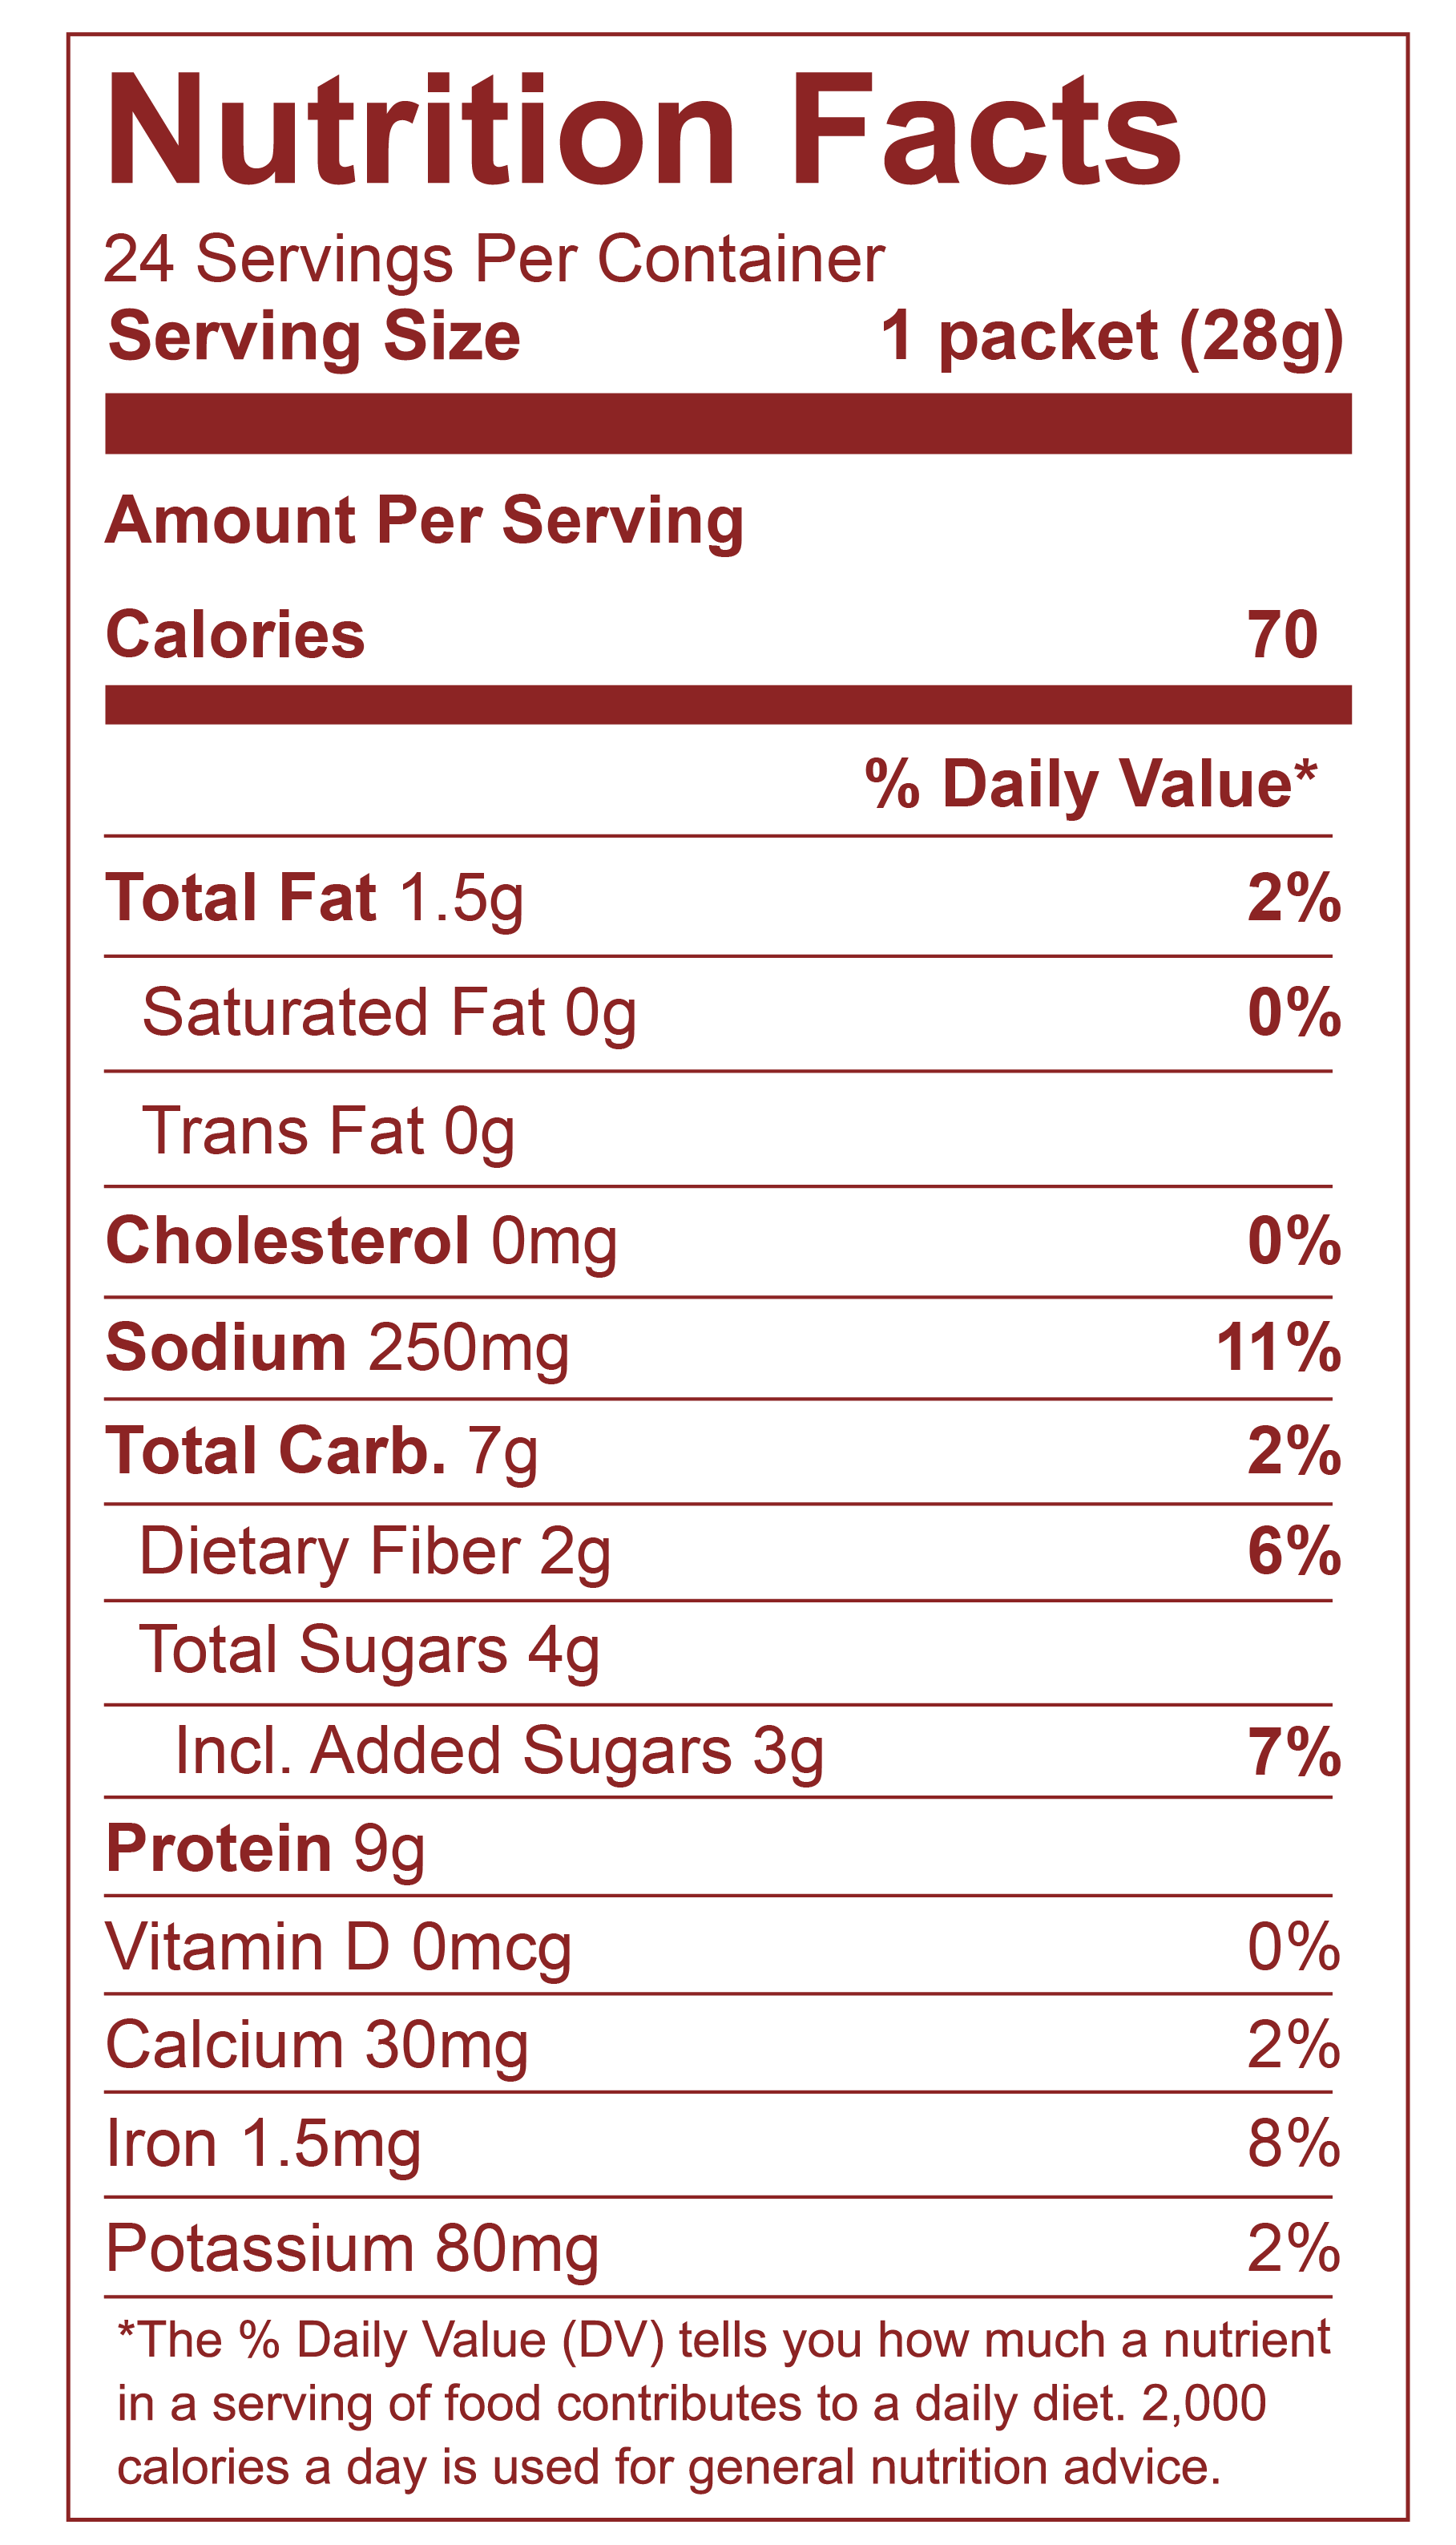 SMOKED Nutrition Facts